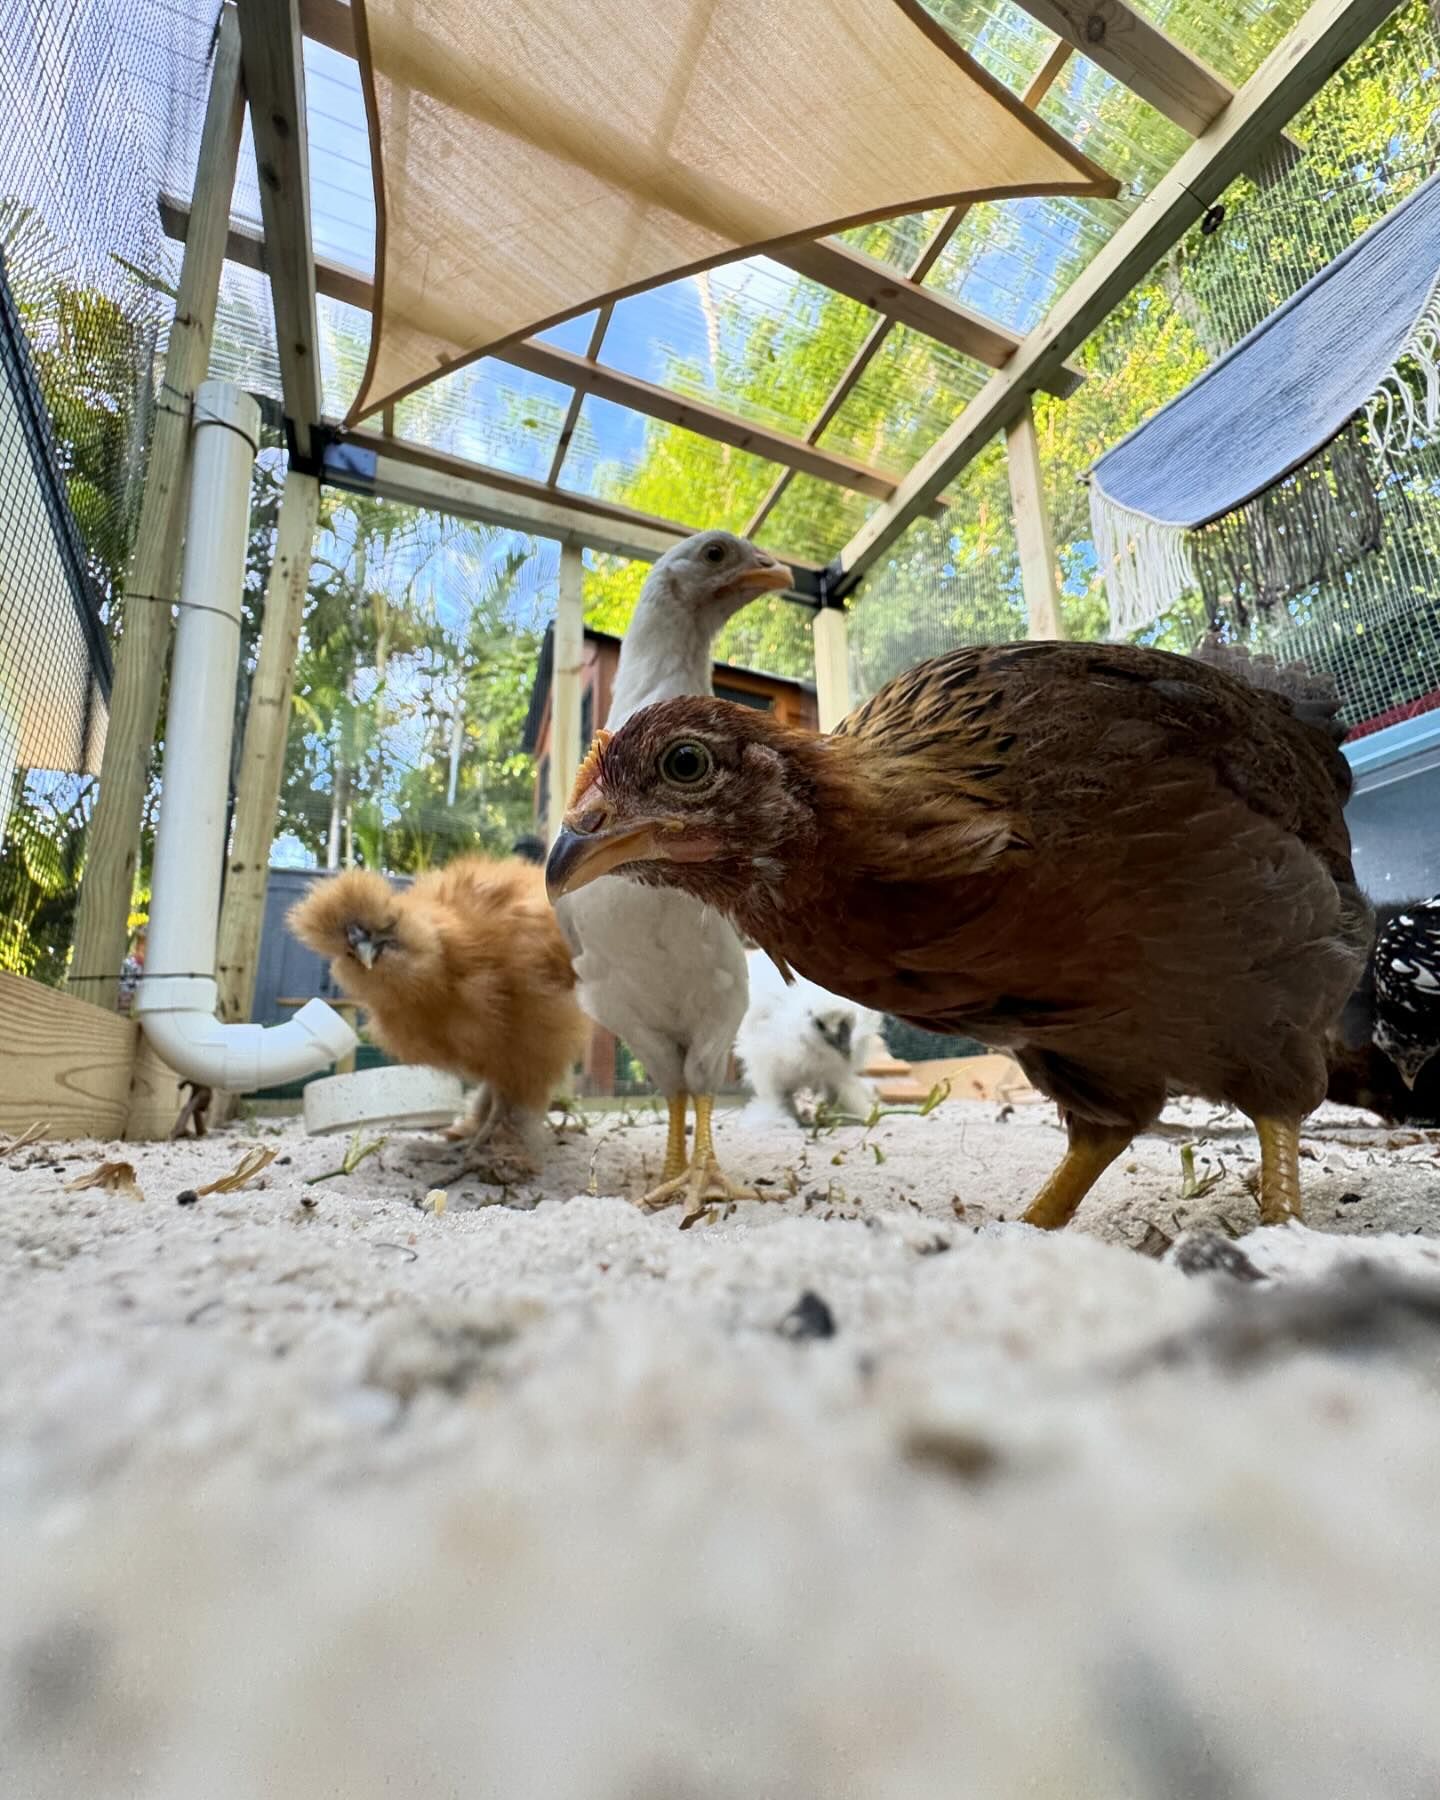 Turns out, if you own chickens, you get ripped throwing around 50lb bags of sand and 70lb bags of feed 🤠🤠 in all honesty I haven't been to the gym in a month and to see that I didn't really lose any progress was insane. Ive been getting all of my gardening and shed building and coop building done and I'm finally able to have some time for normalcy again.
I see why farmers do this full time 🫡 I wouldn't trade my animals or hobbies for the world though. I feel incredibly grateful and thankful to be able to live this lifestyle and further my staying at home habits 😅😅 starting is always the hardest part so now it's about maintaining and that's what I've come to learn works with everything. I hope you're all well and saving time for yourselves 🩵